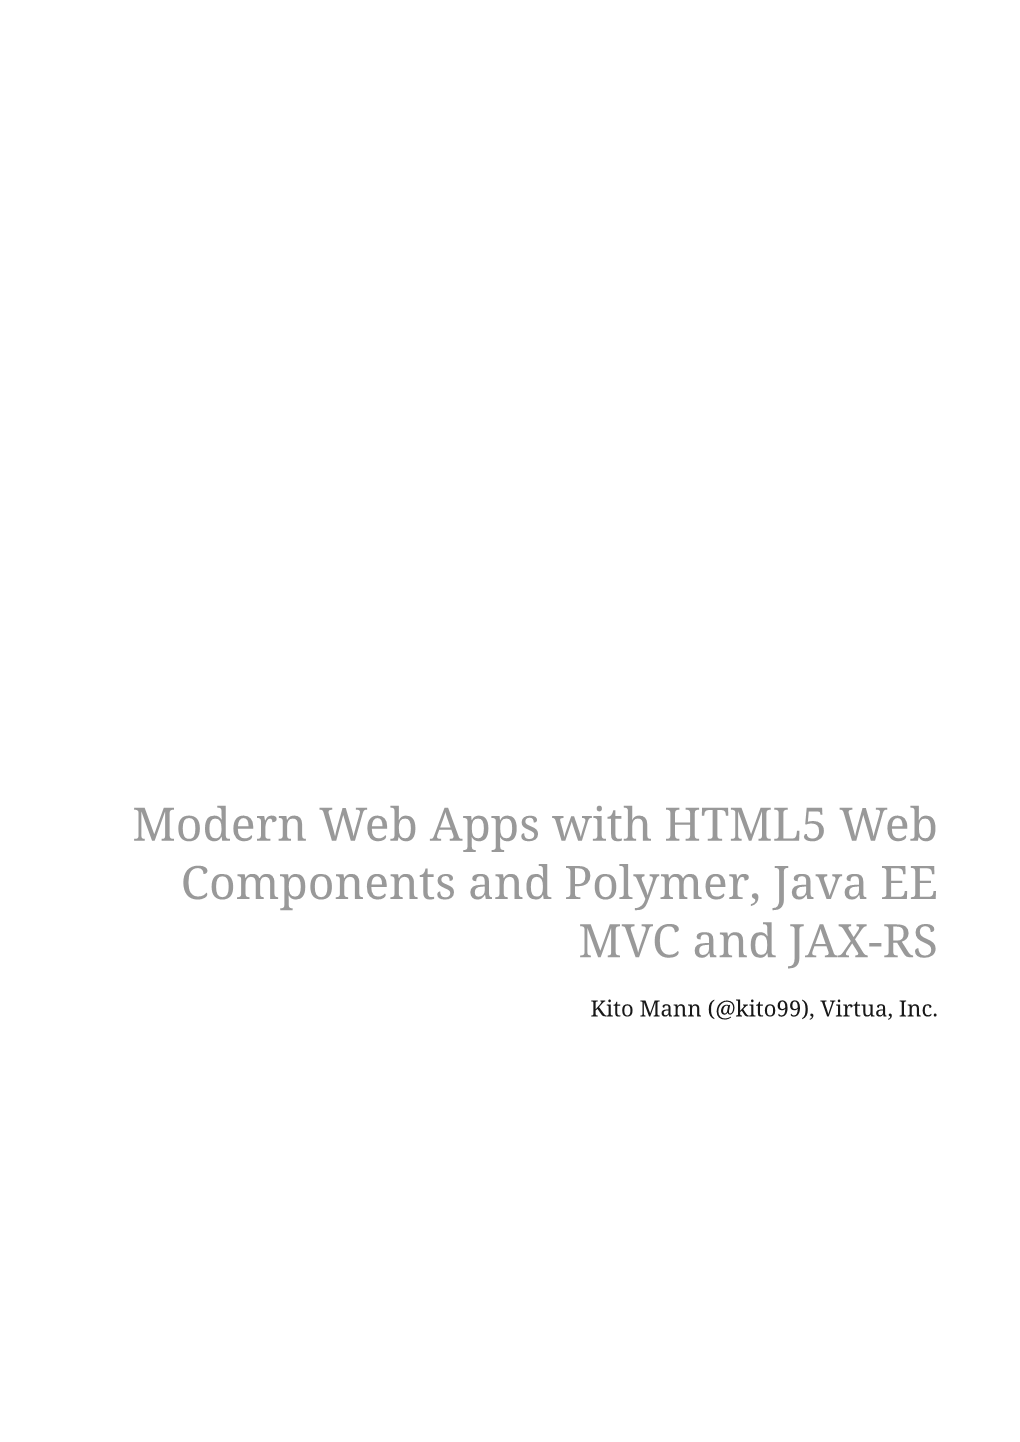 Modern Web Apps with HTML5 Web Components and Polymer, Java EE MVC and JAX-RS